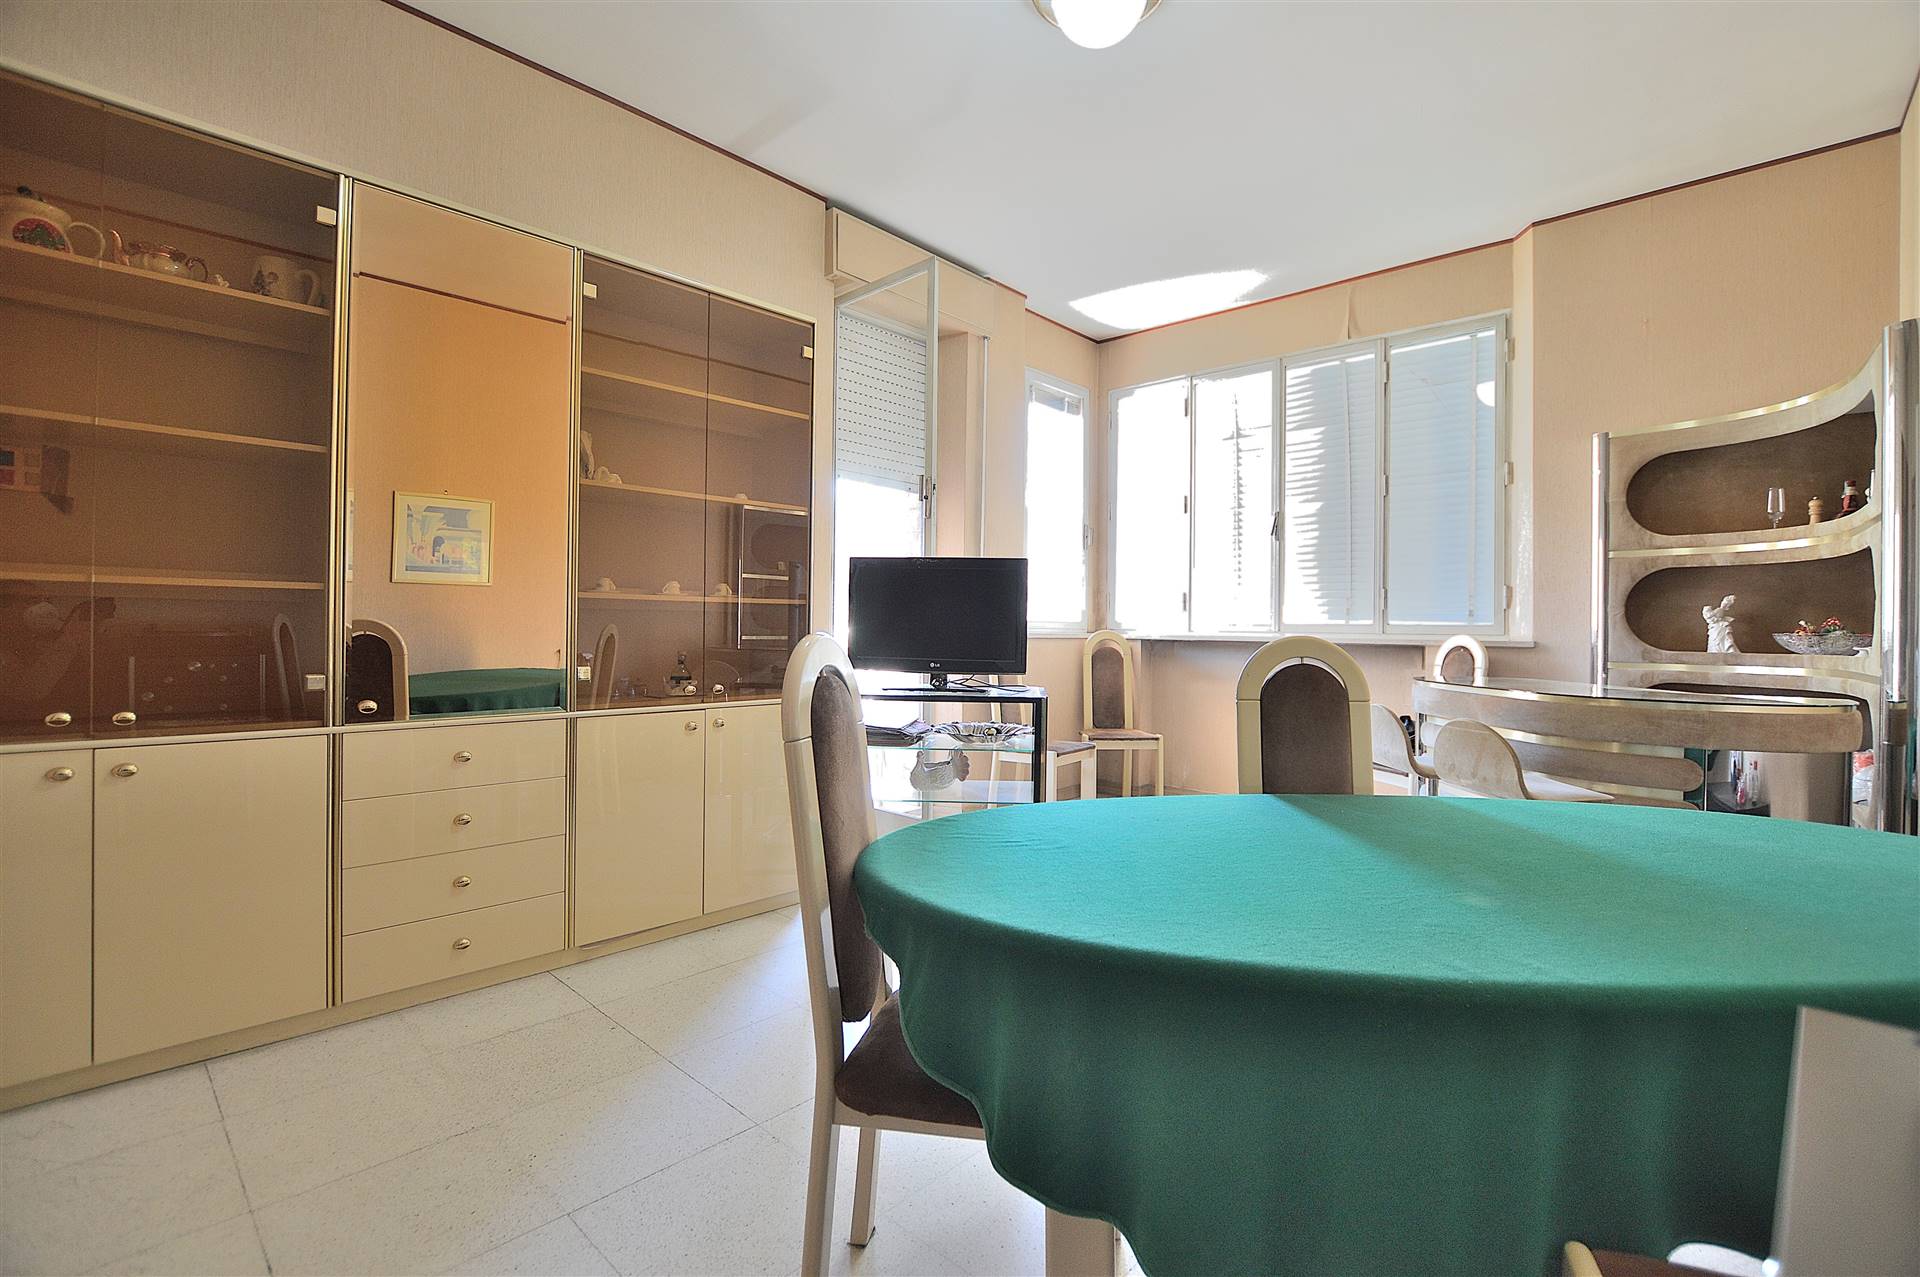 ACQUACALDA, SIENA, Apartment for sale of 70 Sq. mt., Habitable, Heating Individual heating system, Energetic class: G, Epi: 175 kwh/m2 year, placed at 4° on 5, composed by: 4 Rooms, Separate kitchen, 